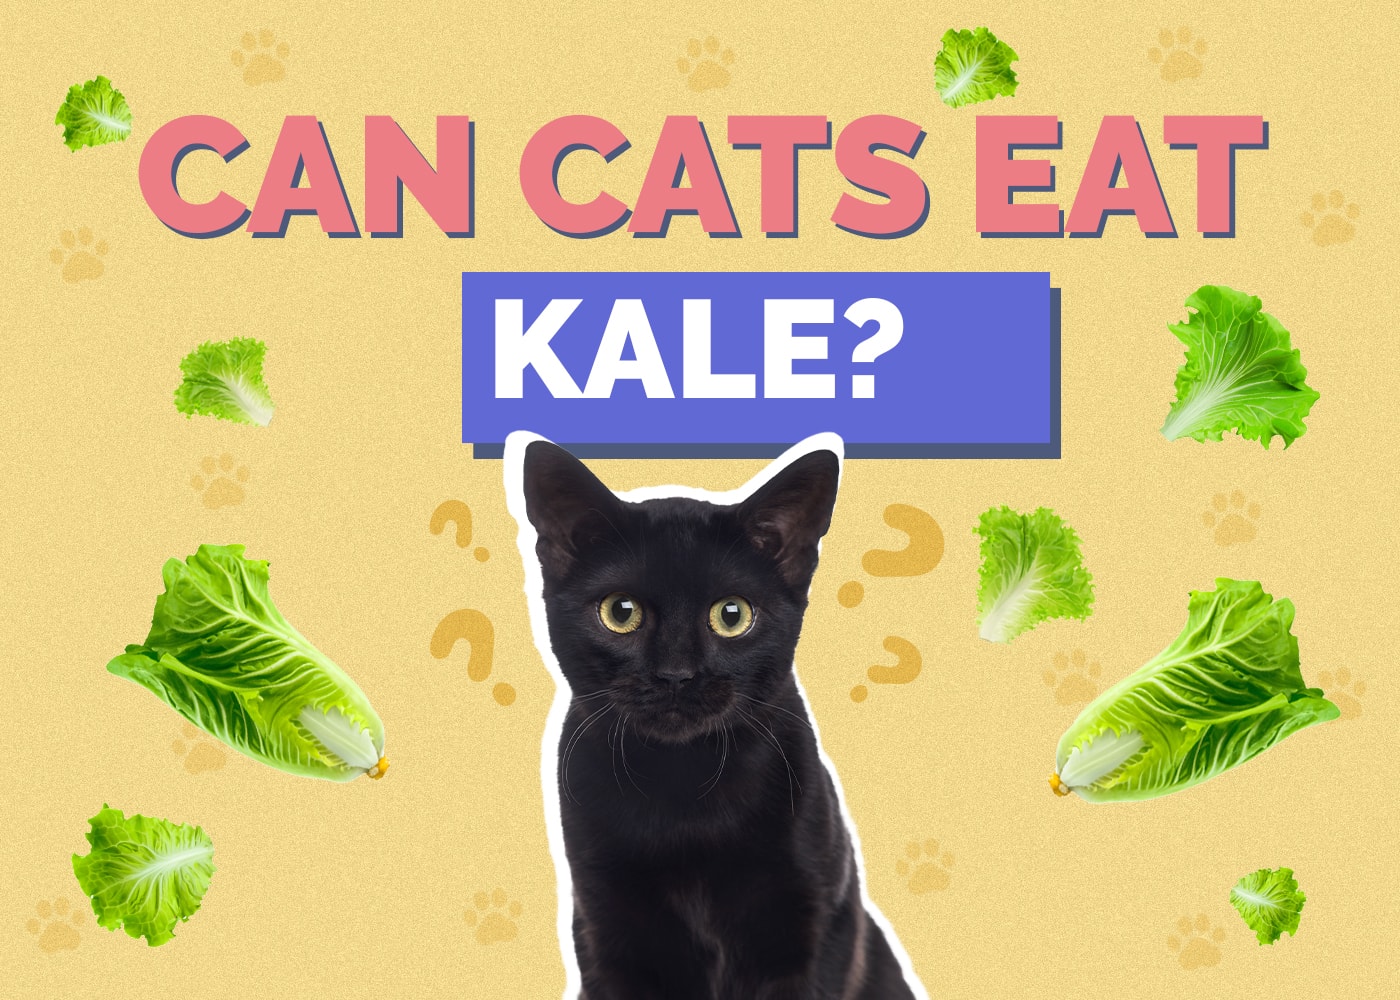 Can Cats Eat kale